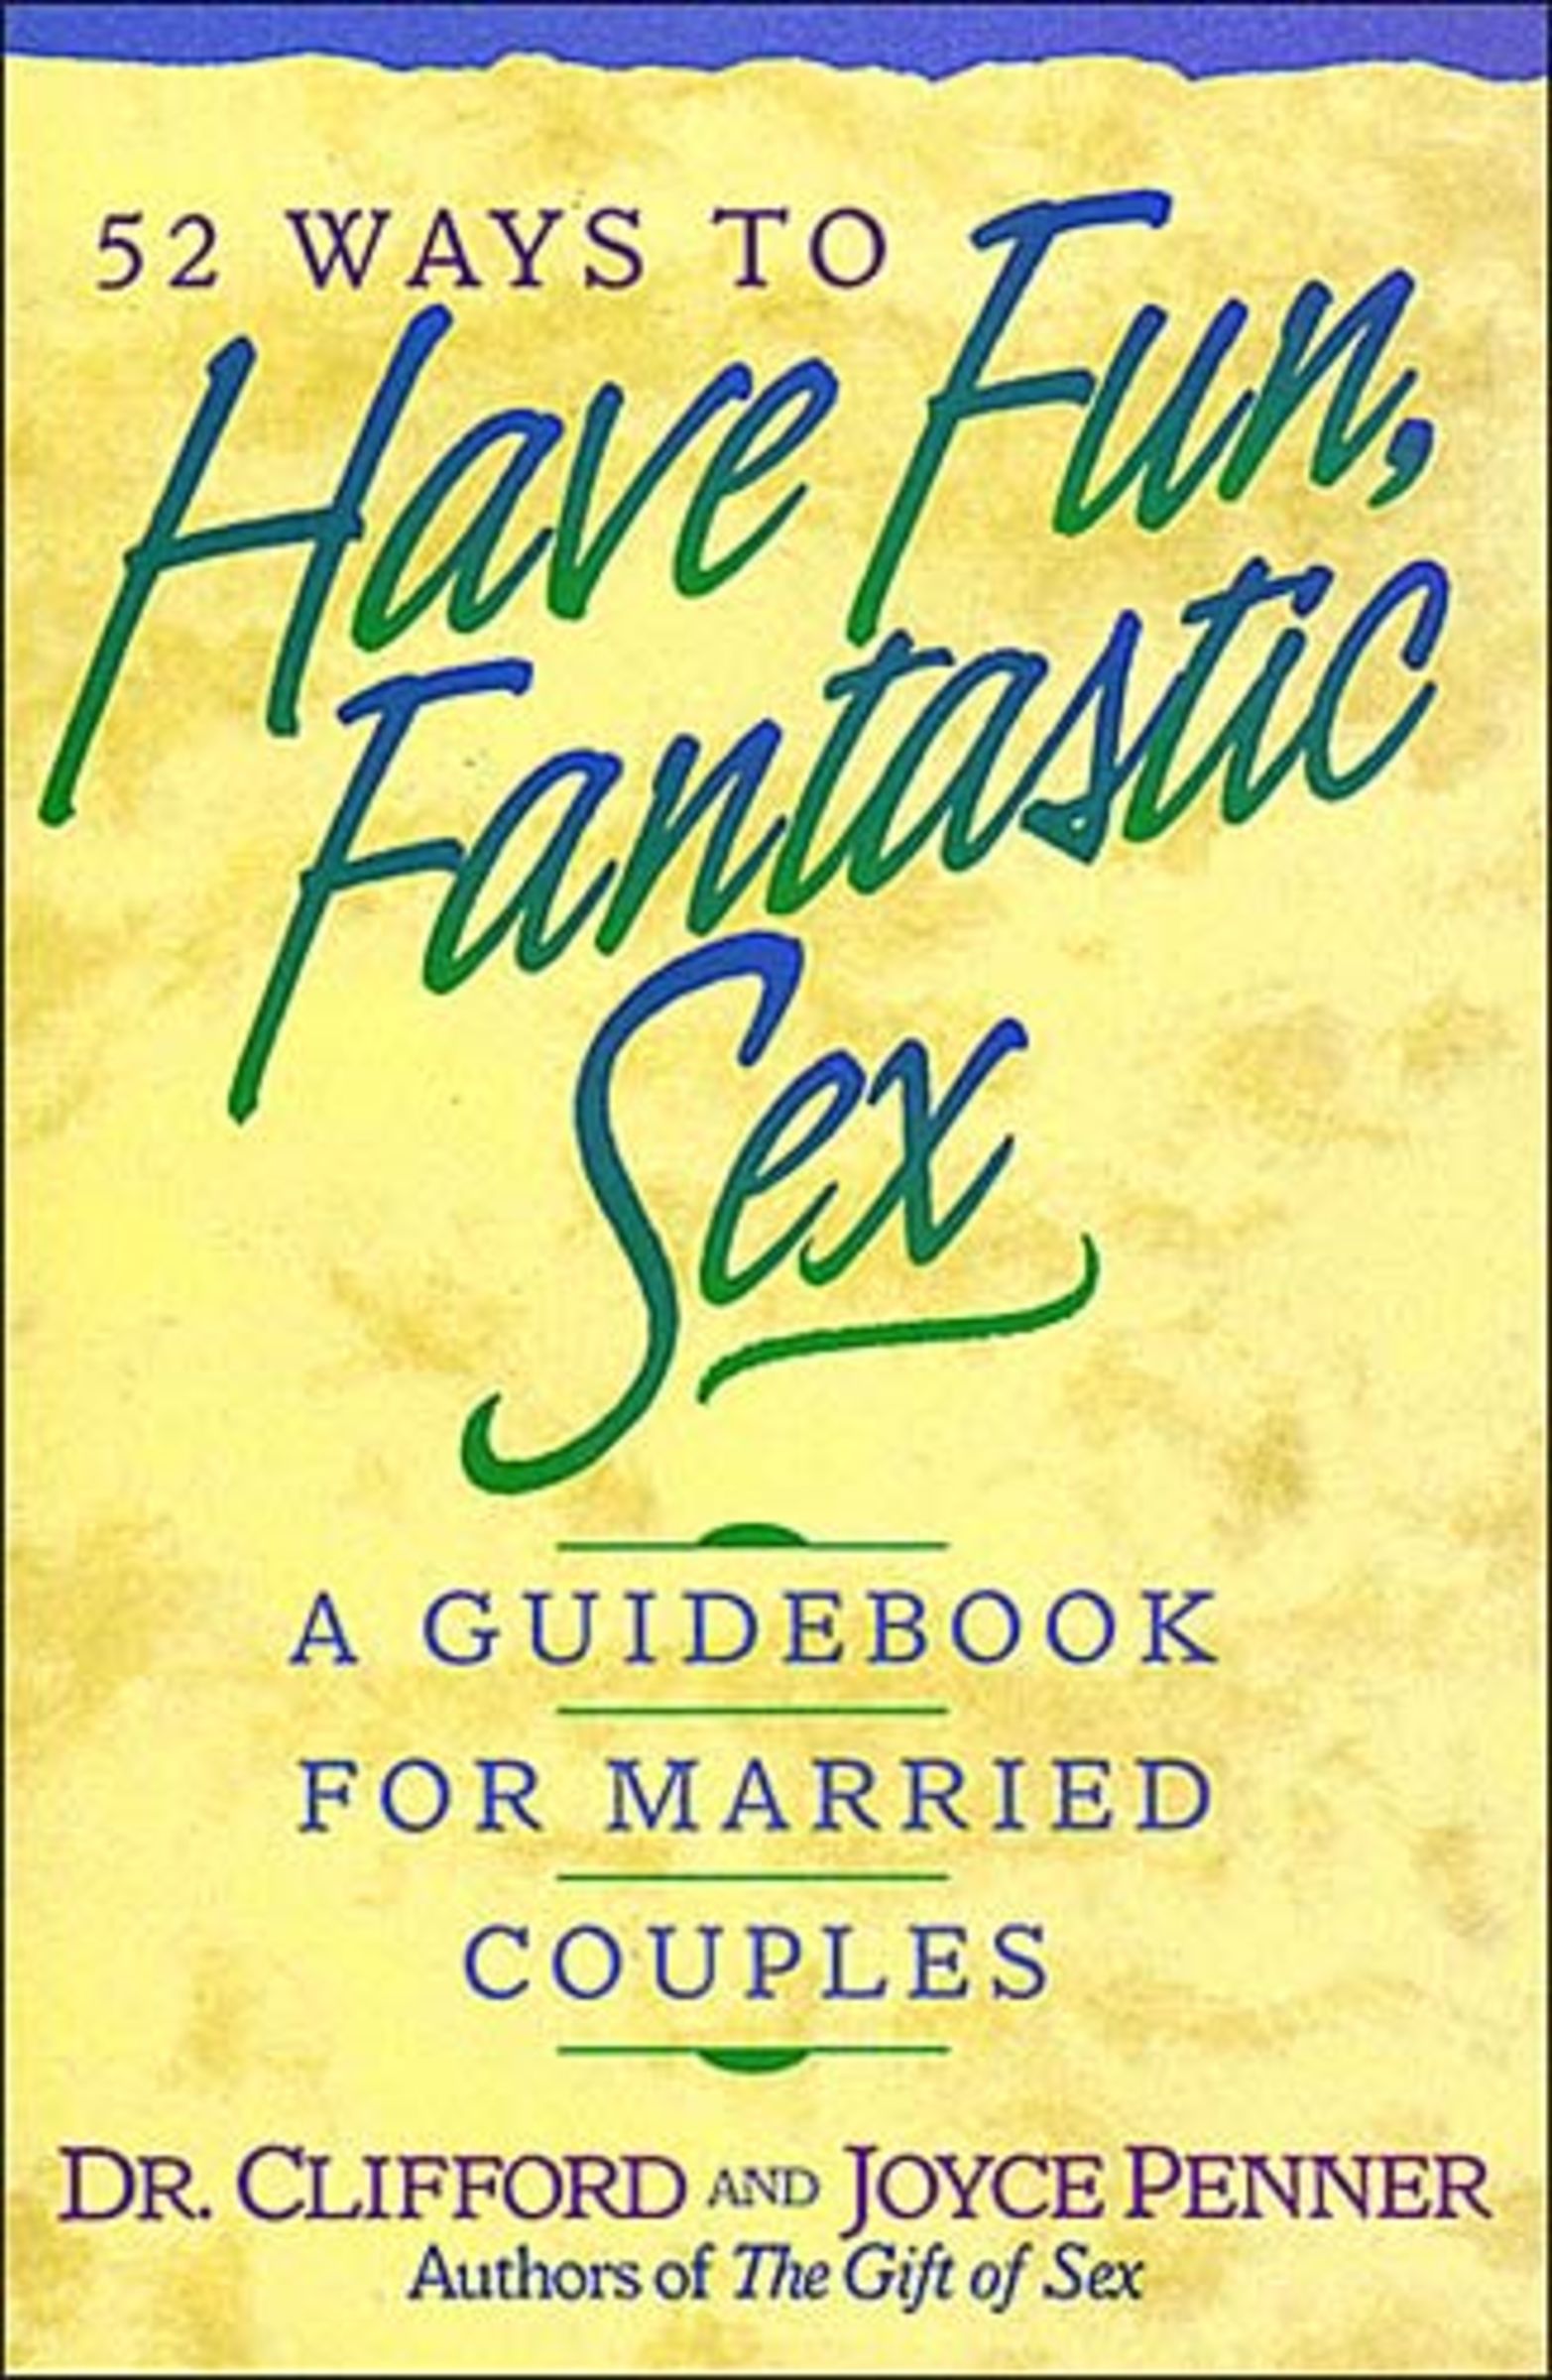 Image of 52 Ways to Have Fun, Fantastic Sex other